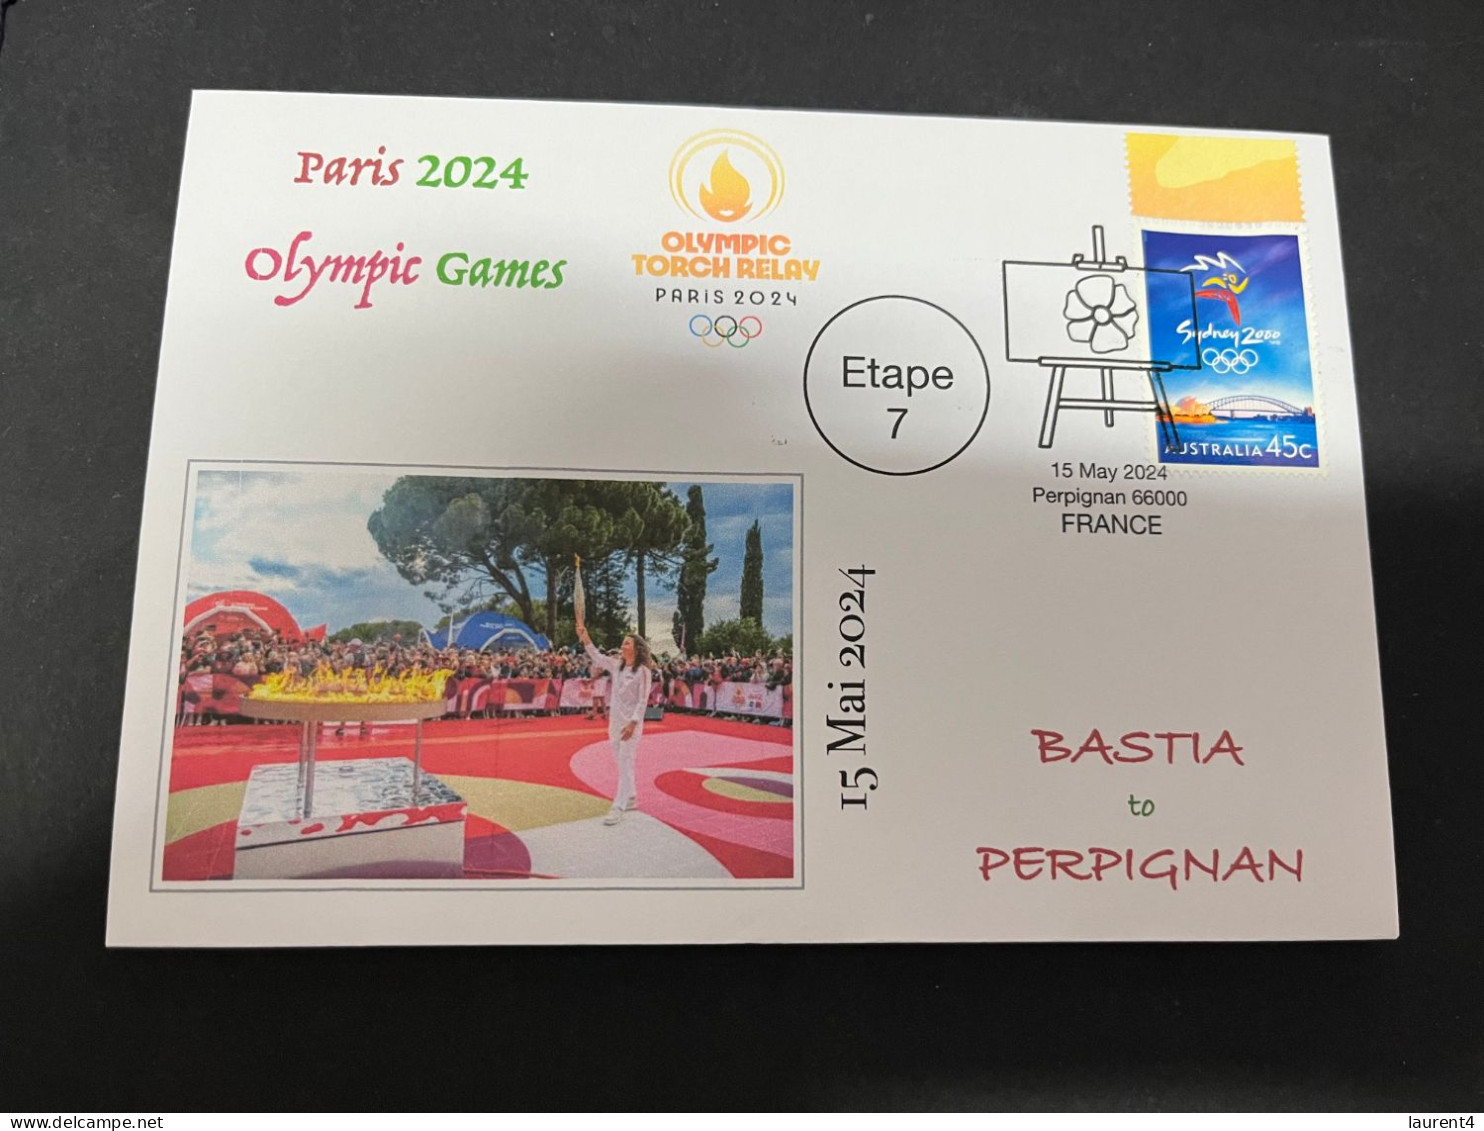 16-5-2024 (5 Z 17) Paris Olympic Games 2024 - Torch Relay (Etape 7) In Perpignan (15-5-2024) With OLYMPIC Stamp - Zomer 2024: Parijs